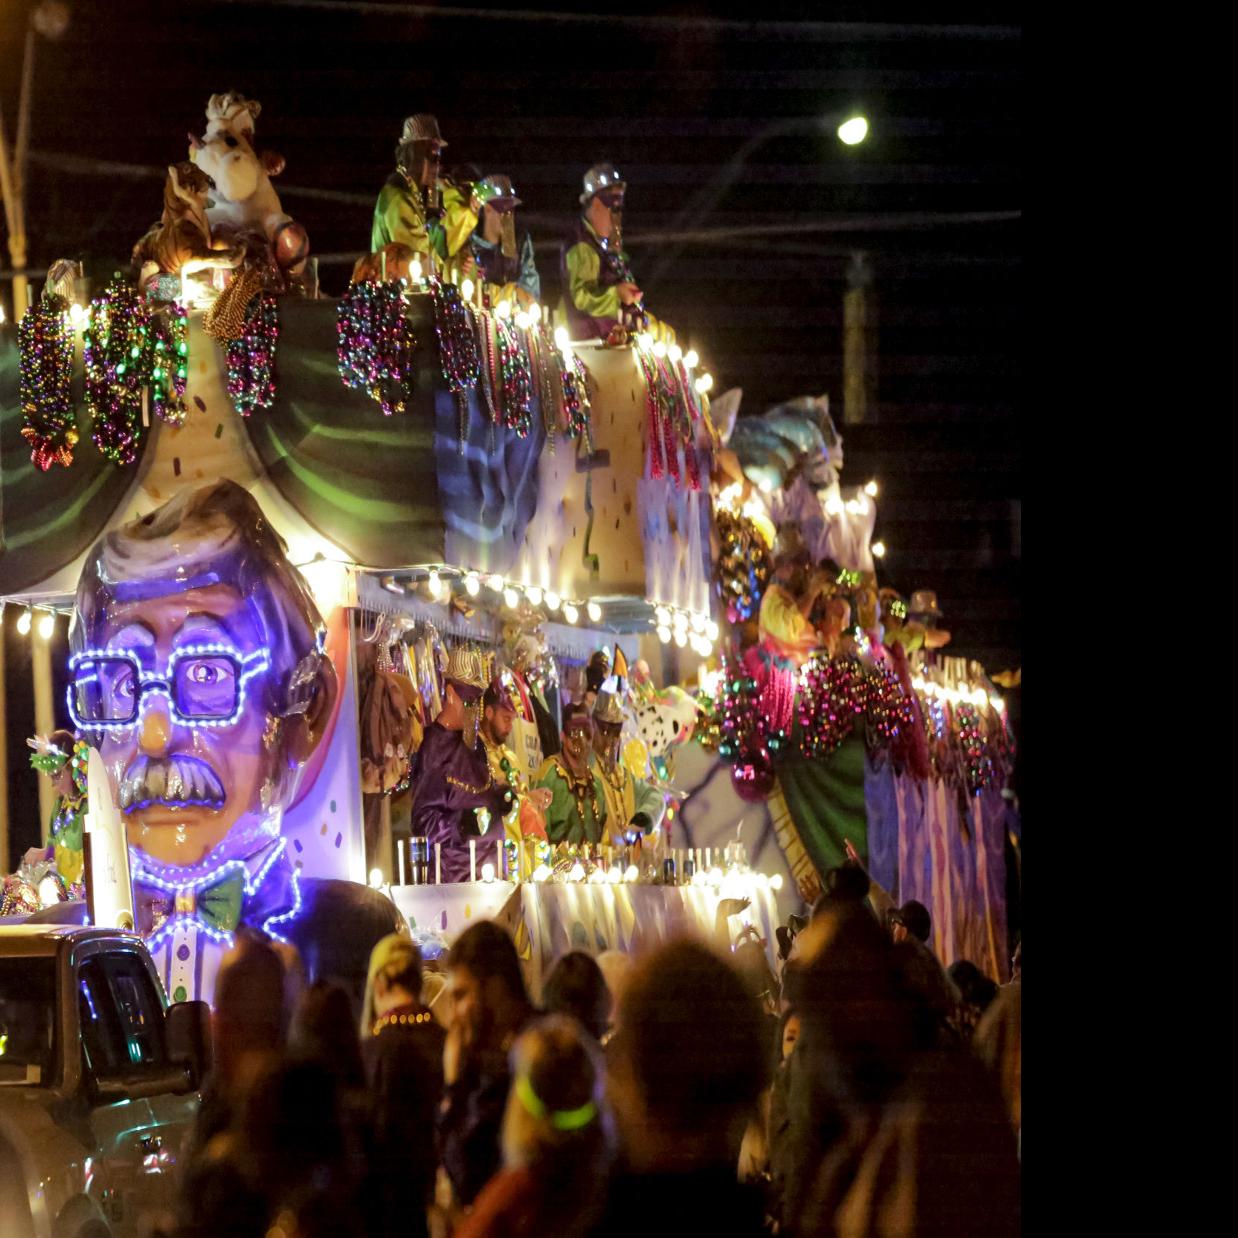 For Mardi Gras season, Kenner's Isis, all St. Tammany parades